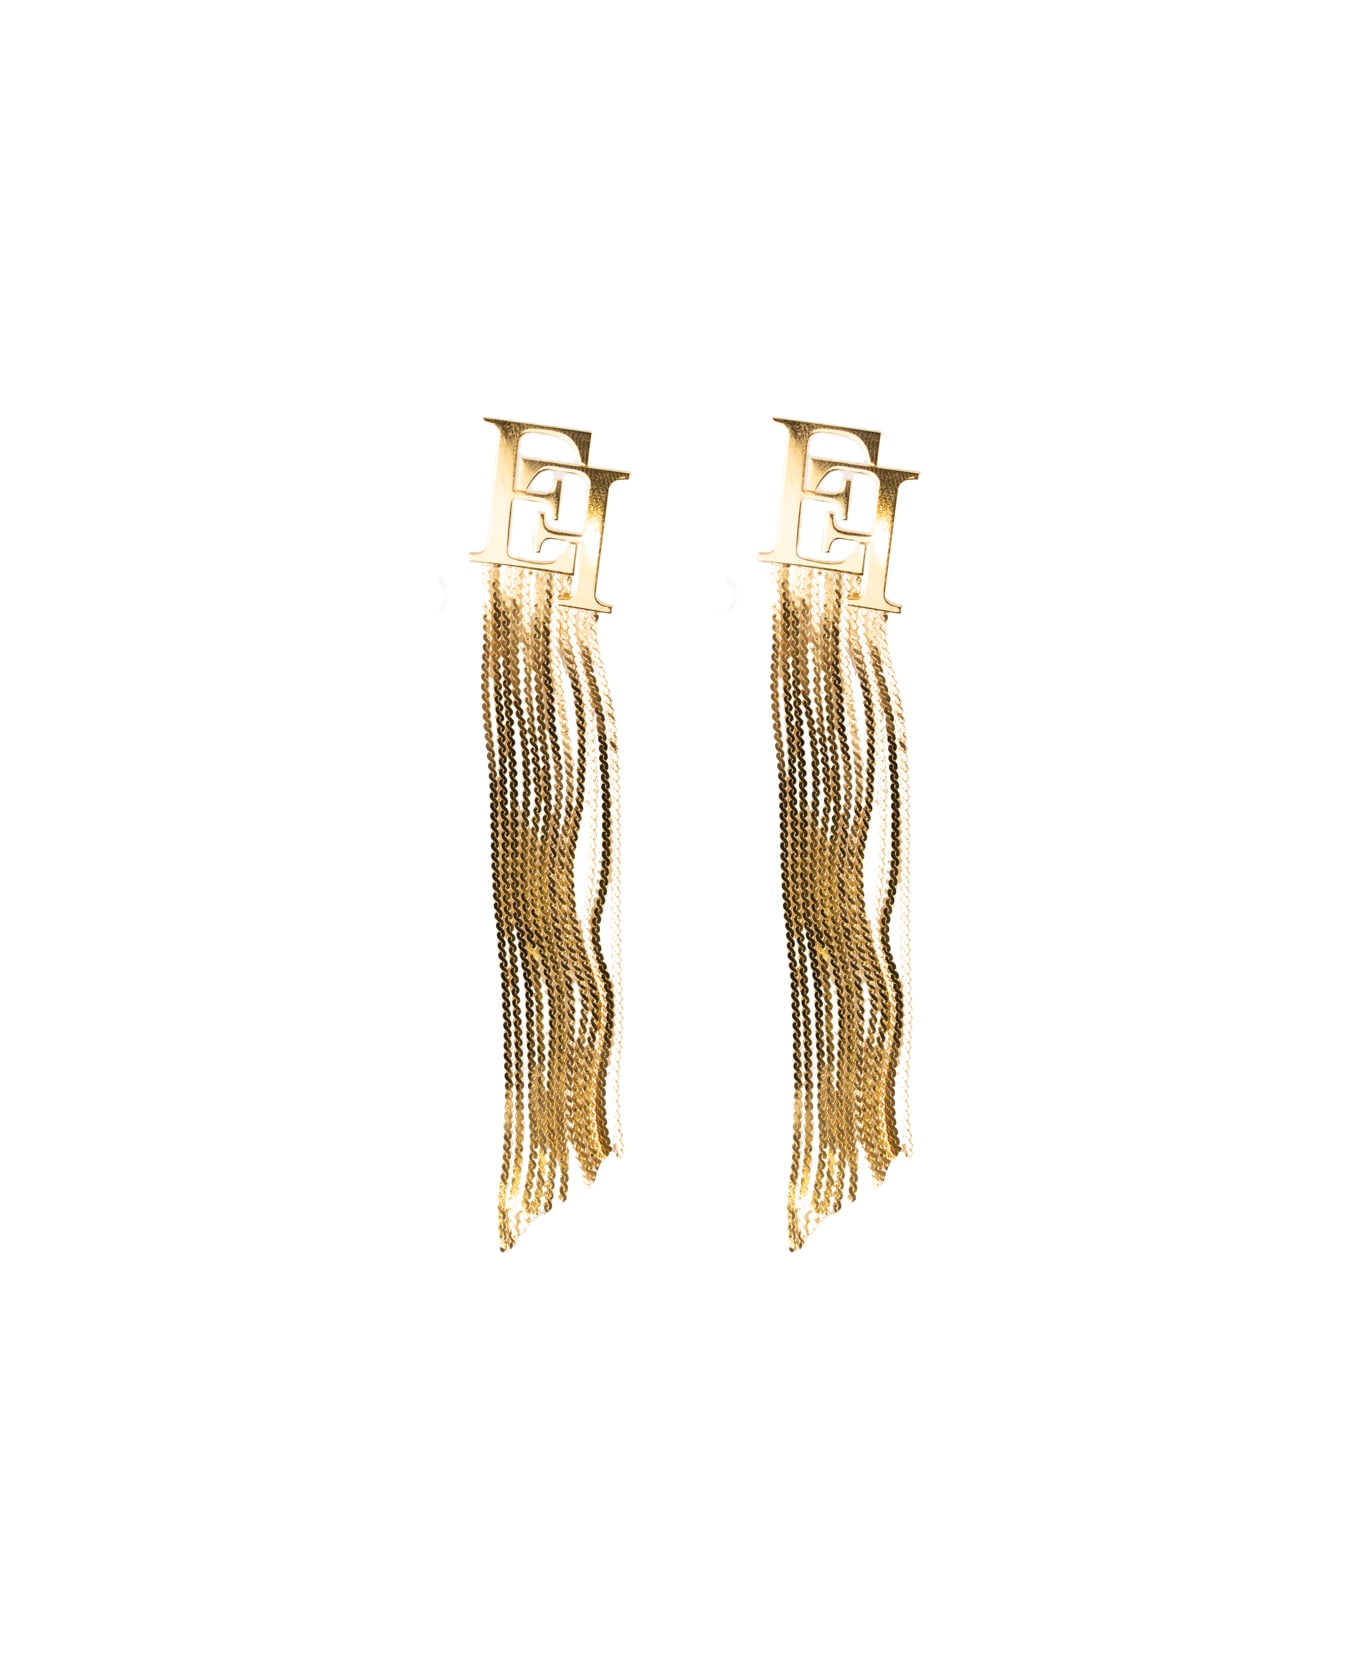 Elisabetta Franchi Drop Earrings With Logo And Fringes - Oro giallo